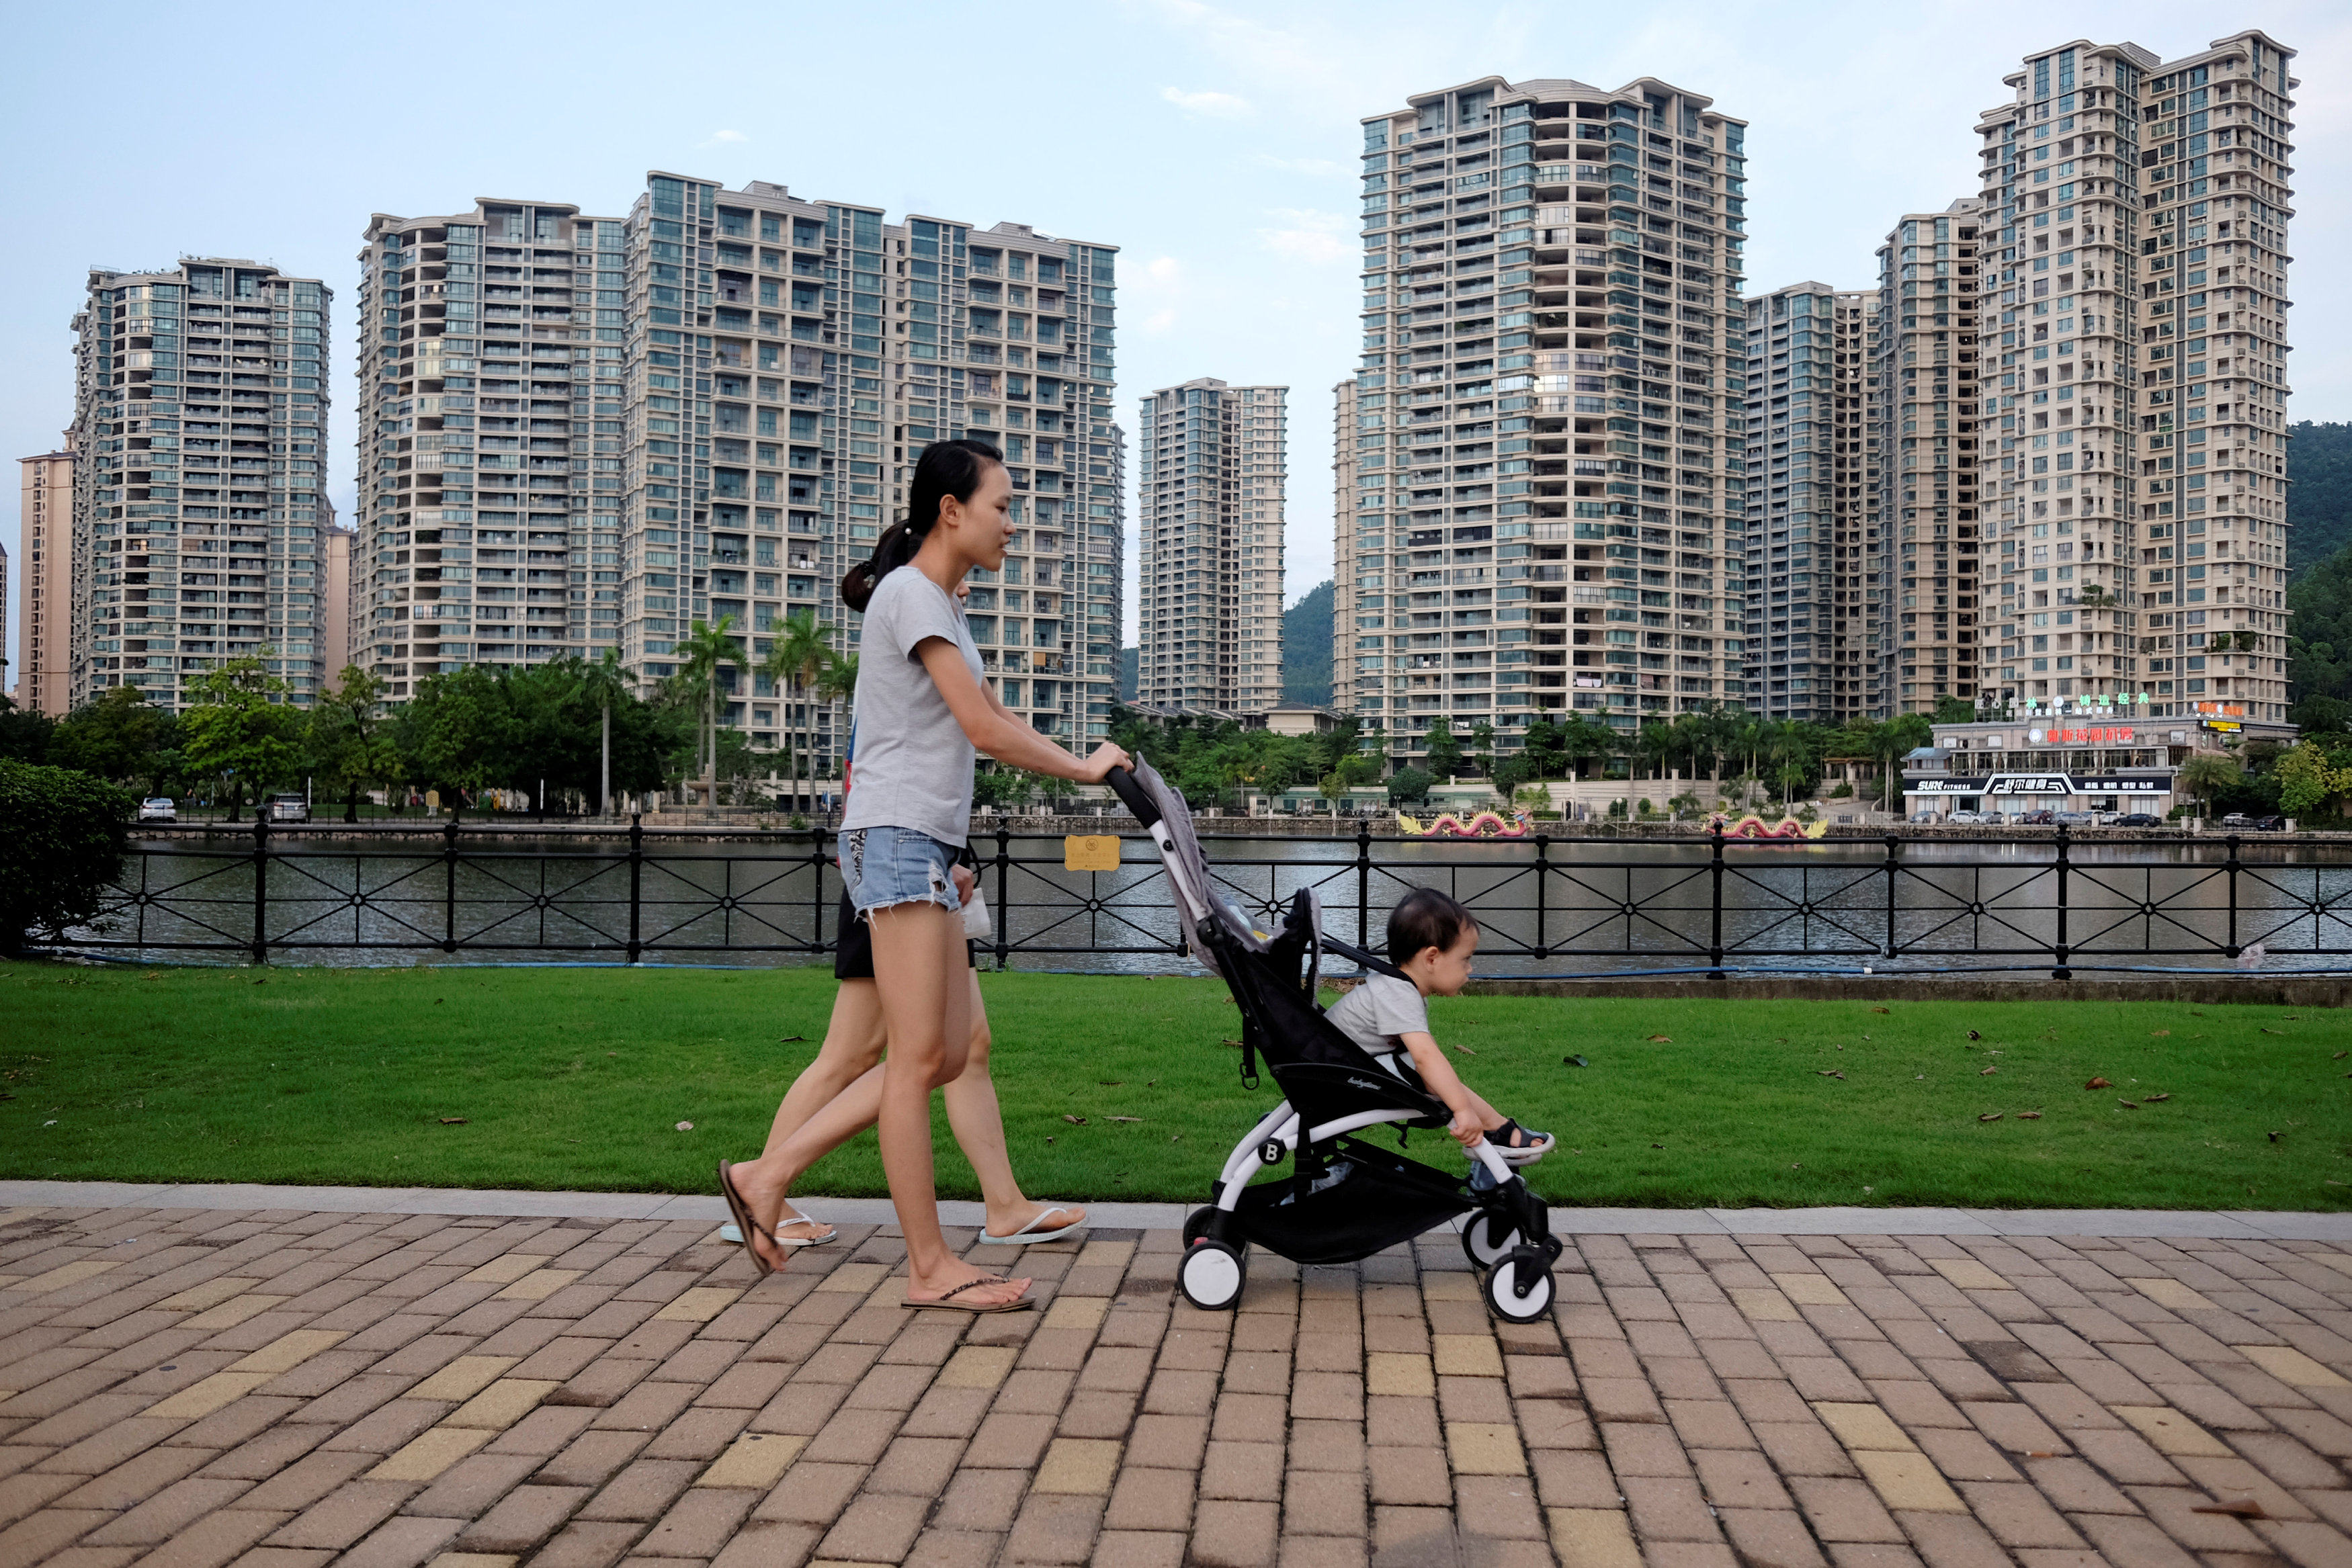 People walk past a residential property development by Agile Property in Zhongshan, China onJune 27, 2018. Photo: Reuters